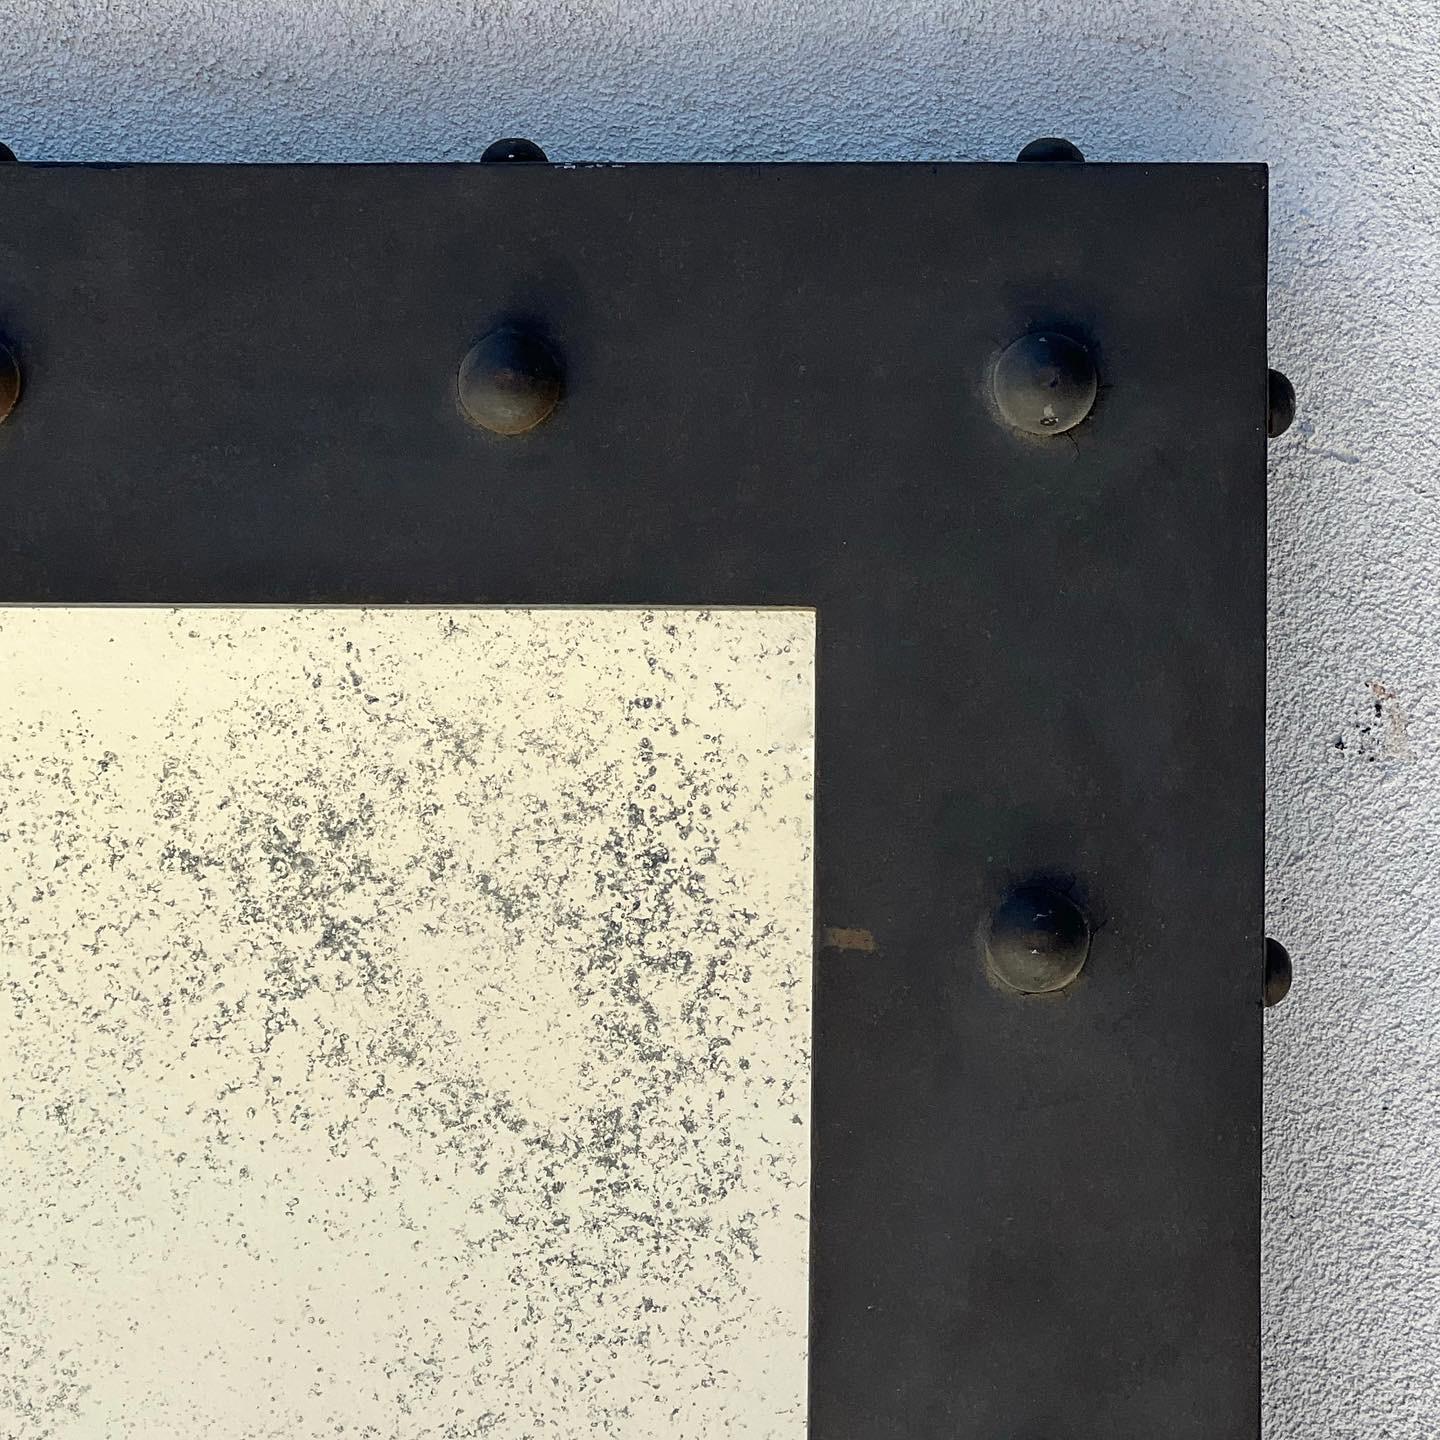 A custom monumental hand-forged iron mirror with industrial and brutalist attributes by designer Michael Smith. Giant - and heavy. Fully unique; this piece was made specially for a member of the Belushi family and comes from his estate. Note the